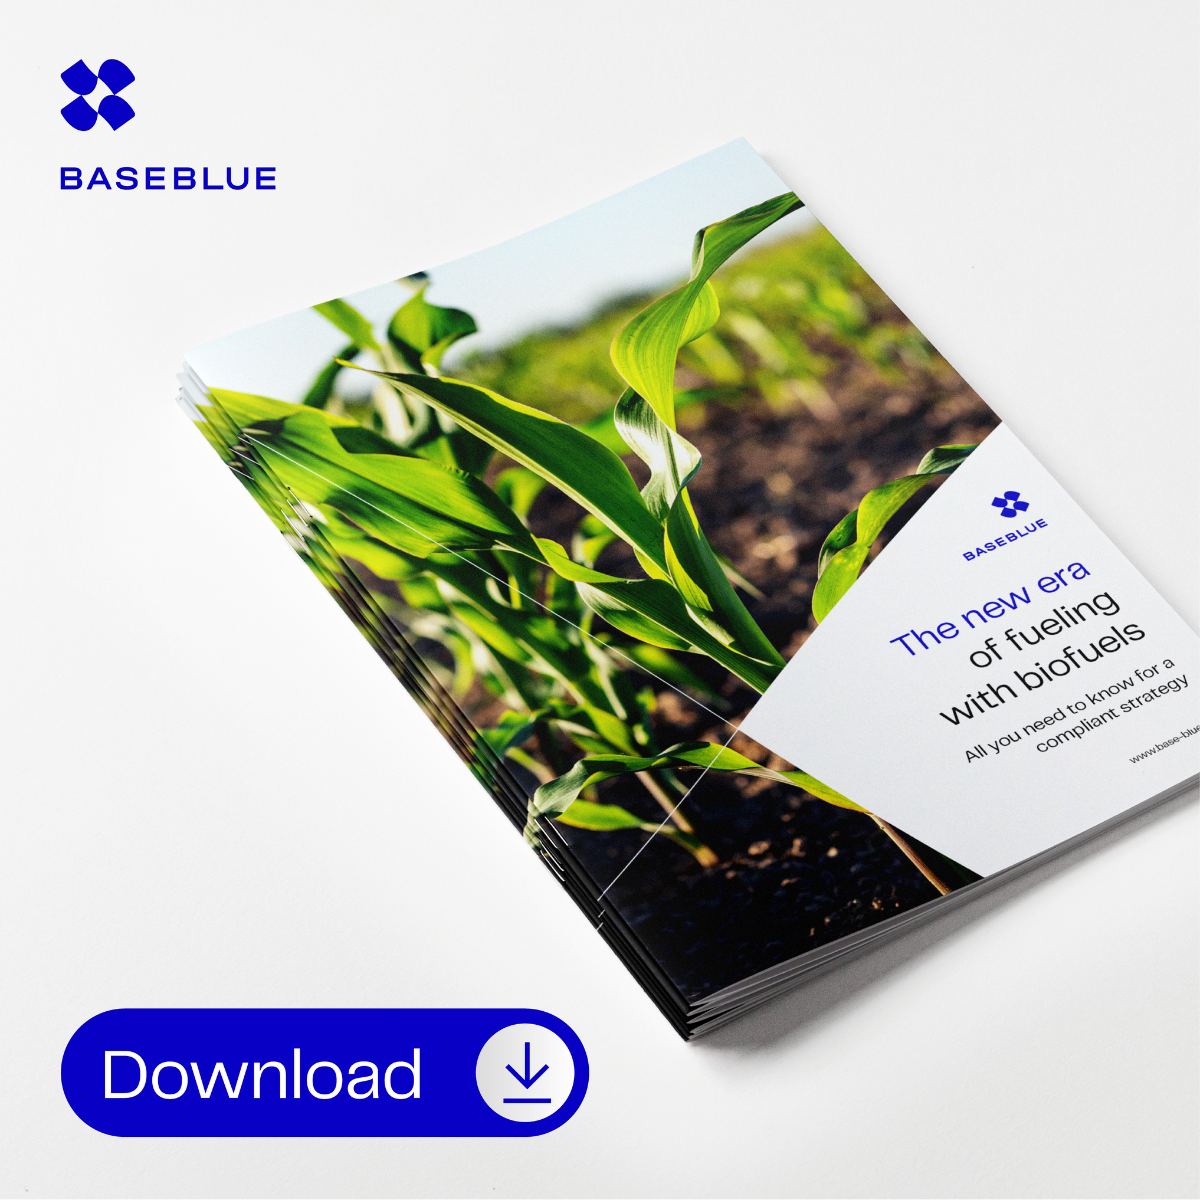 Baseblue is thrilled to introduce a resource to assist you in navigating the future: our Biofuel Booklet!
Download the Biofuel Booklet today: lnkd.in/dYhFFi2v

#Biofuels #BunkeringIndustry #Baseblue #GreenEnergy #RenewableResources